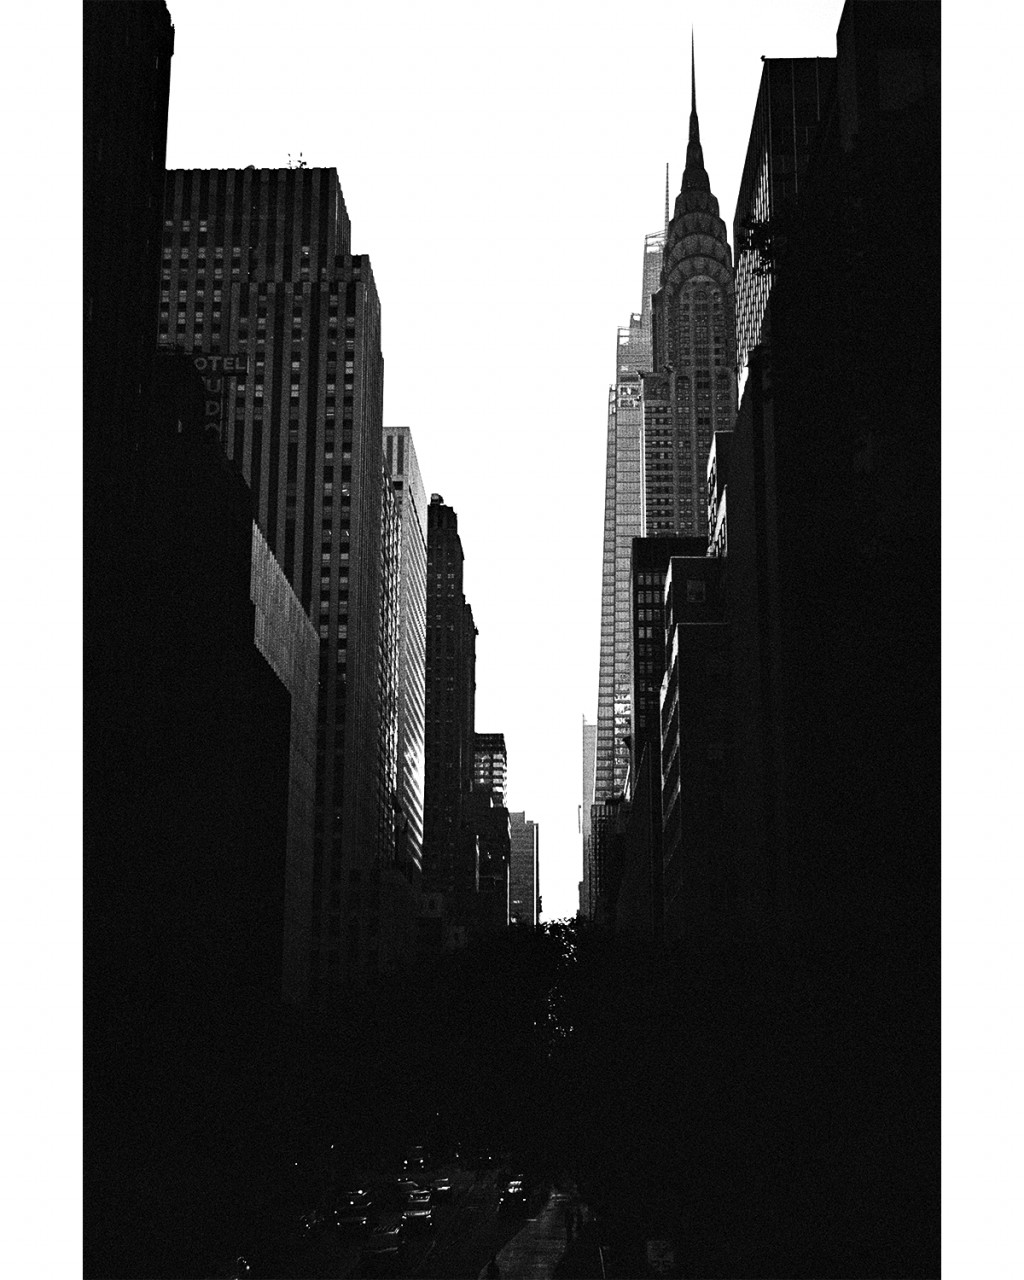 Shot at box speed in NY by https://www.instagram.com/_andrew.jpeg/